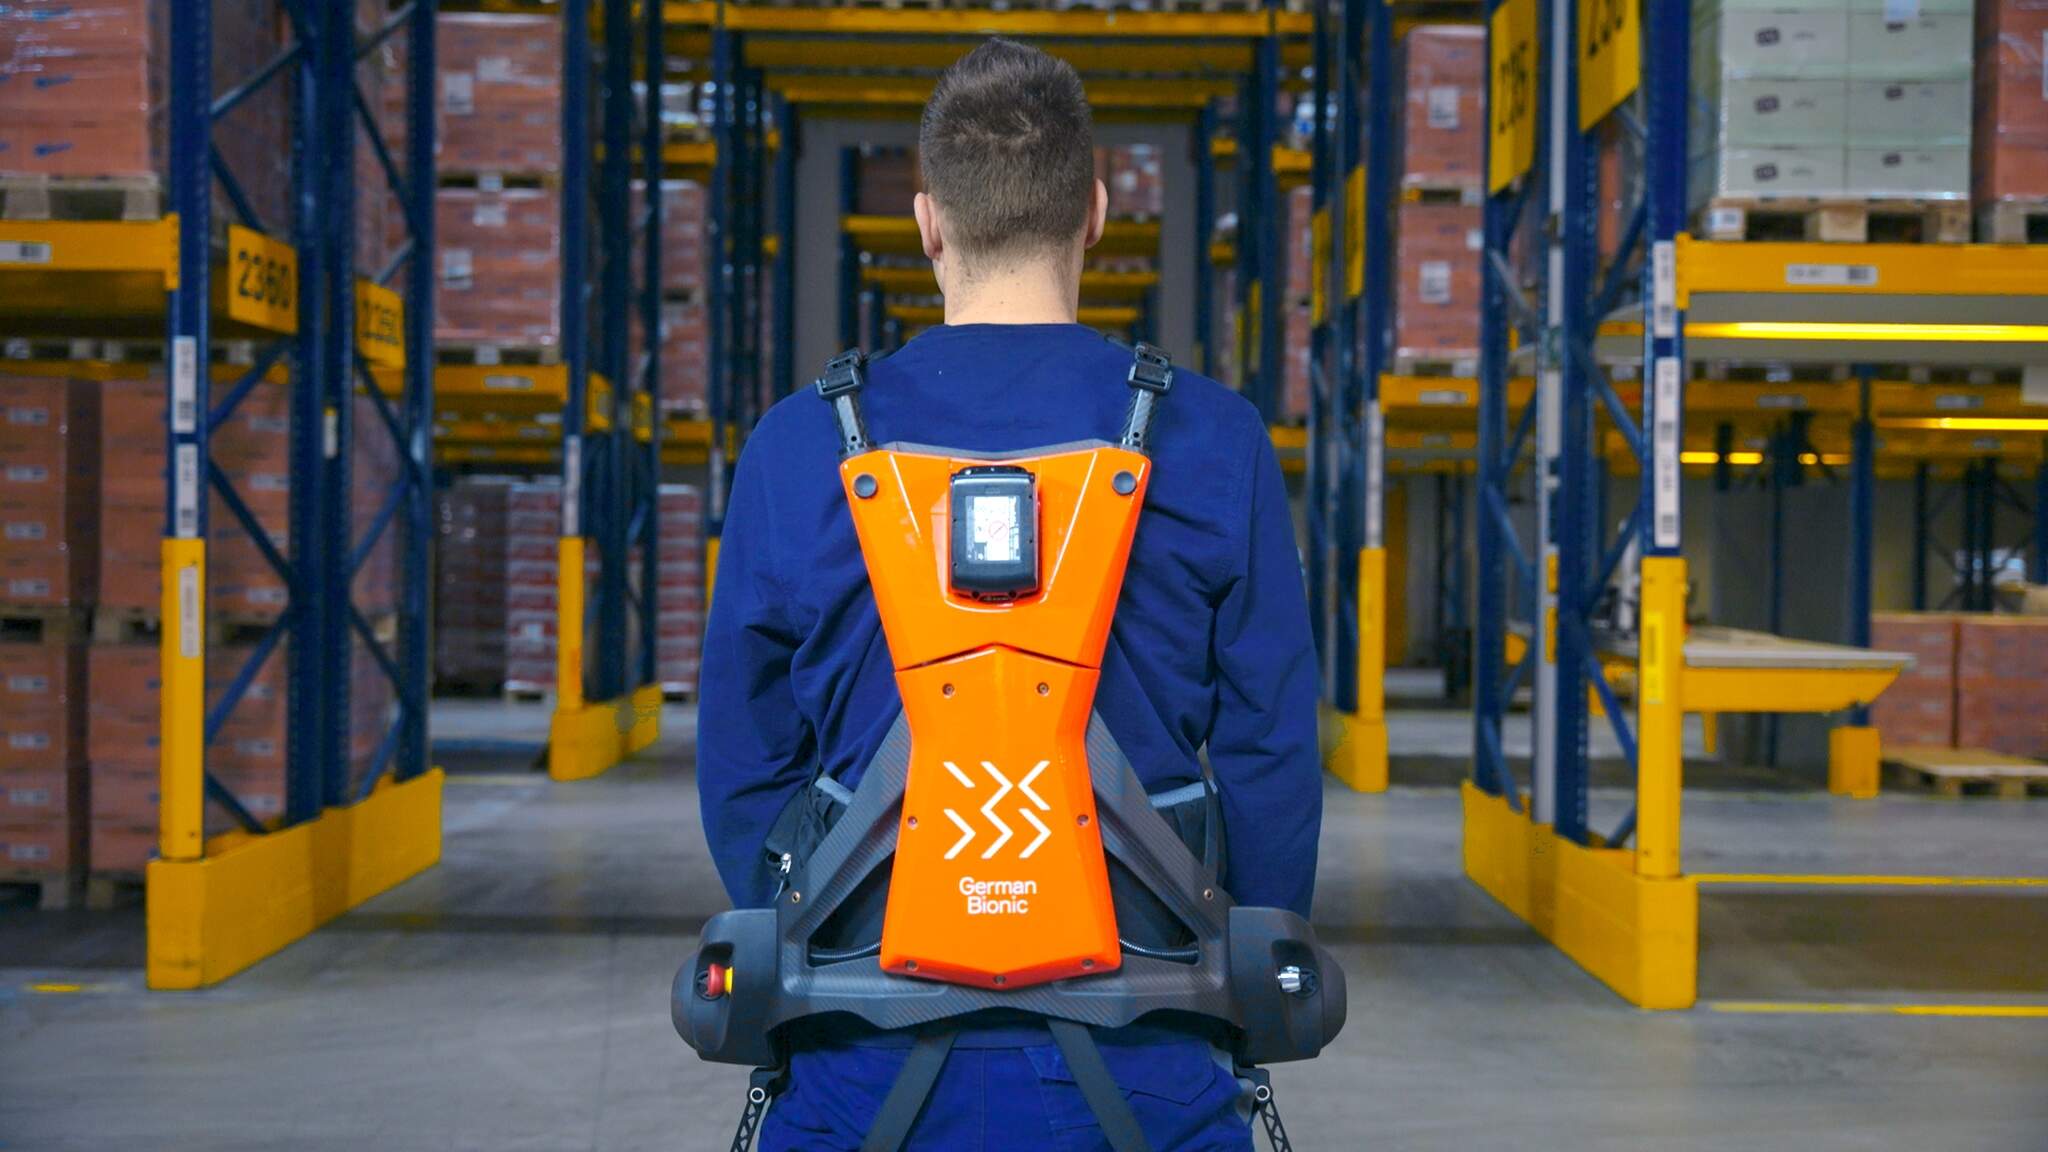 Exoskeletons in trial use at the DACHSER Warehouse